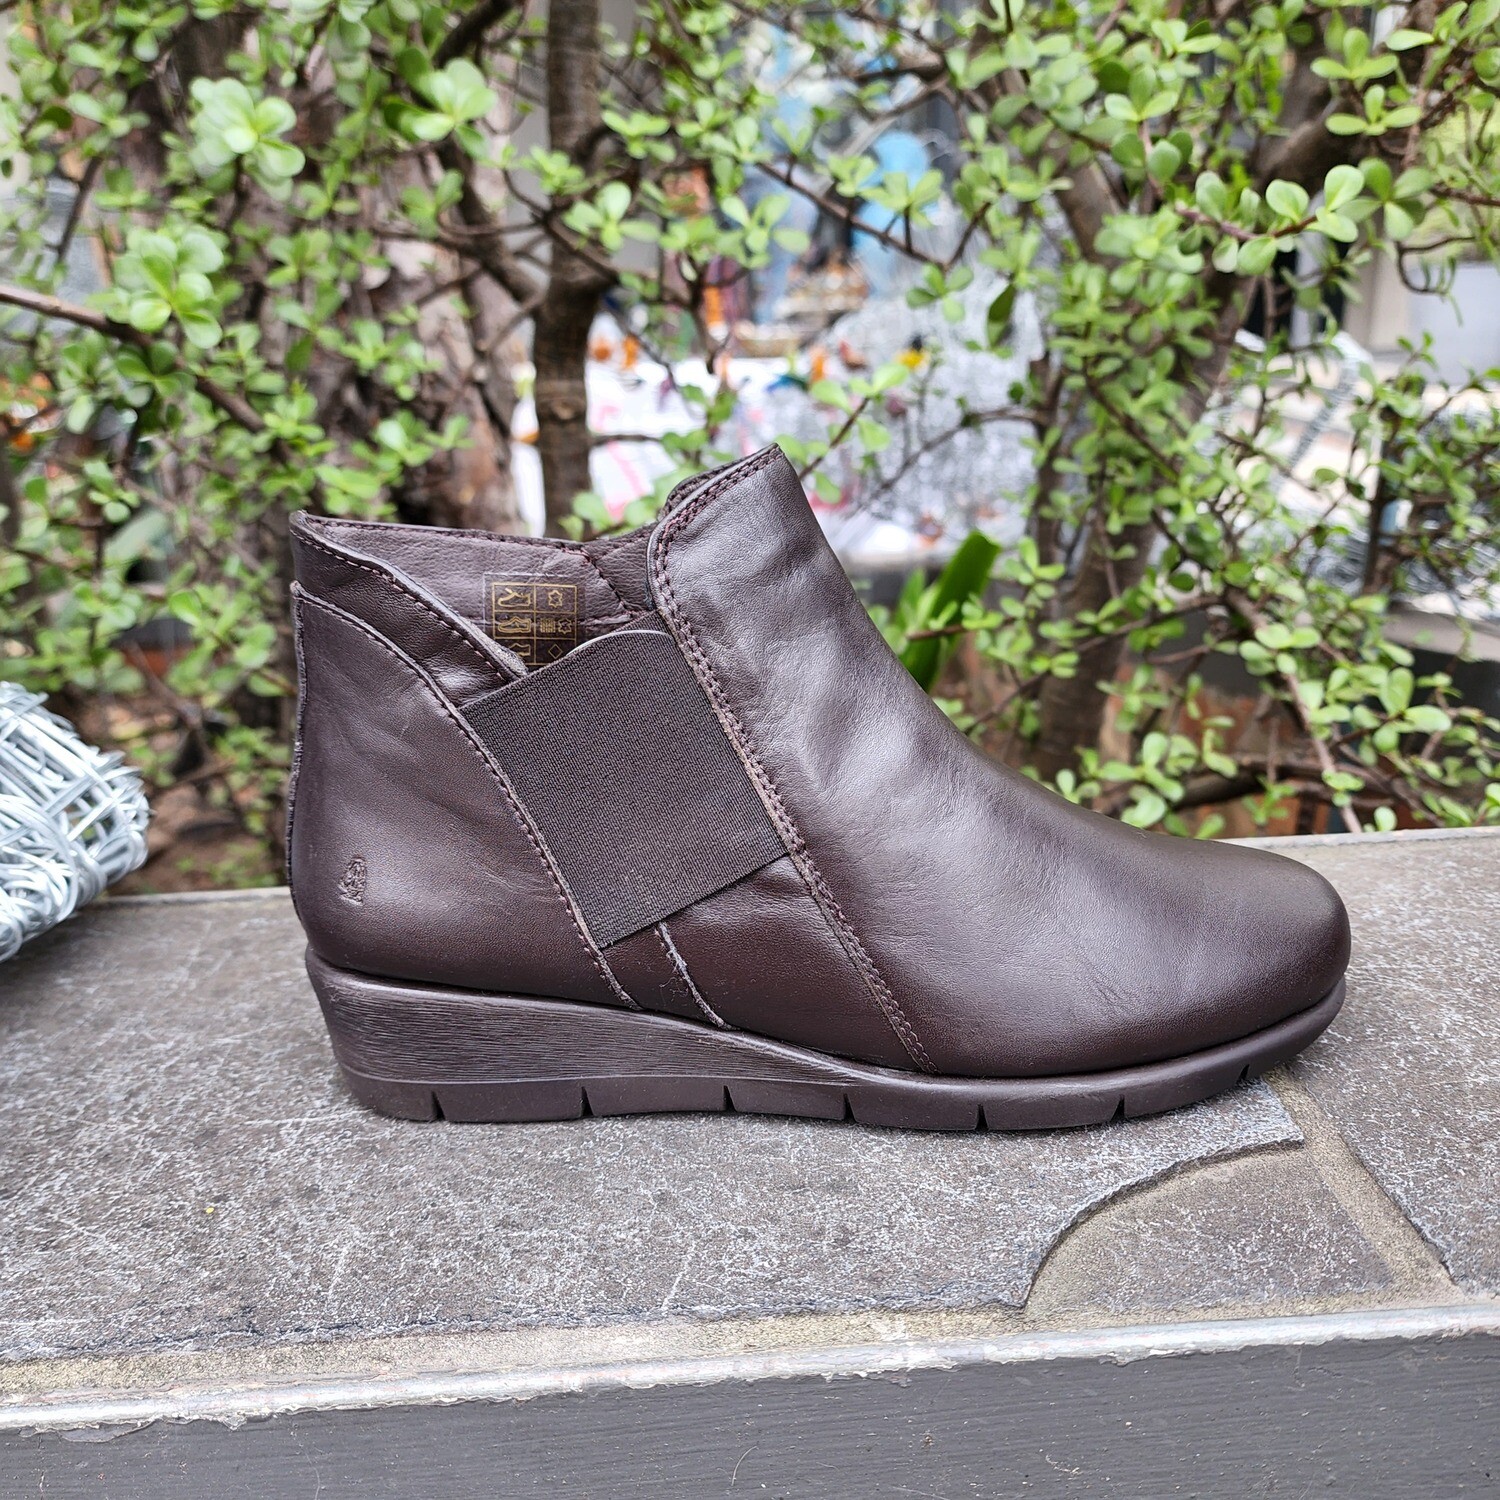 Hush Puppies - Wedge Ankle Boot - Brown